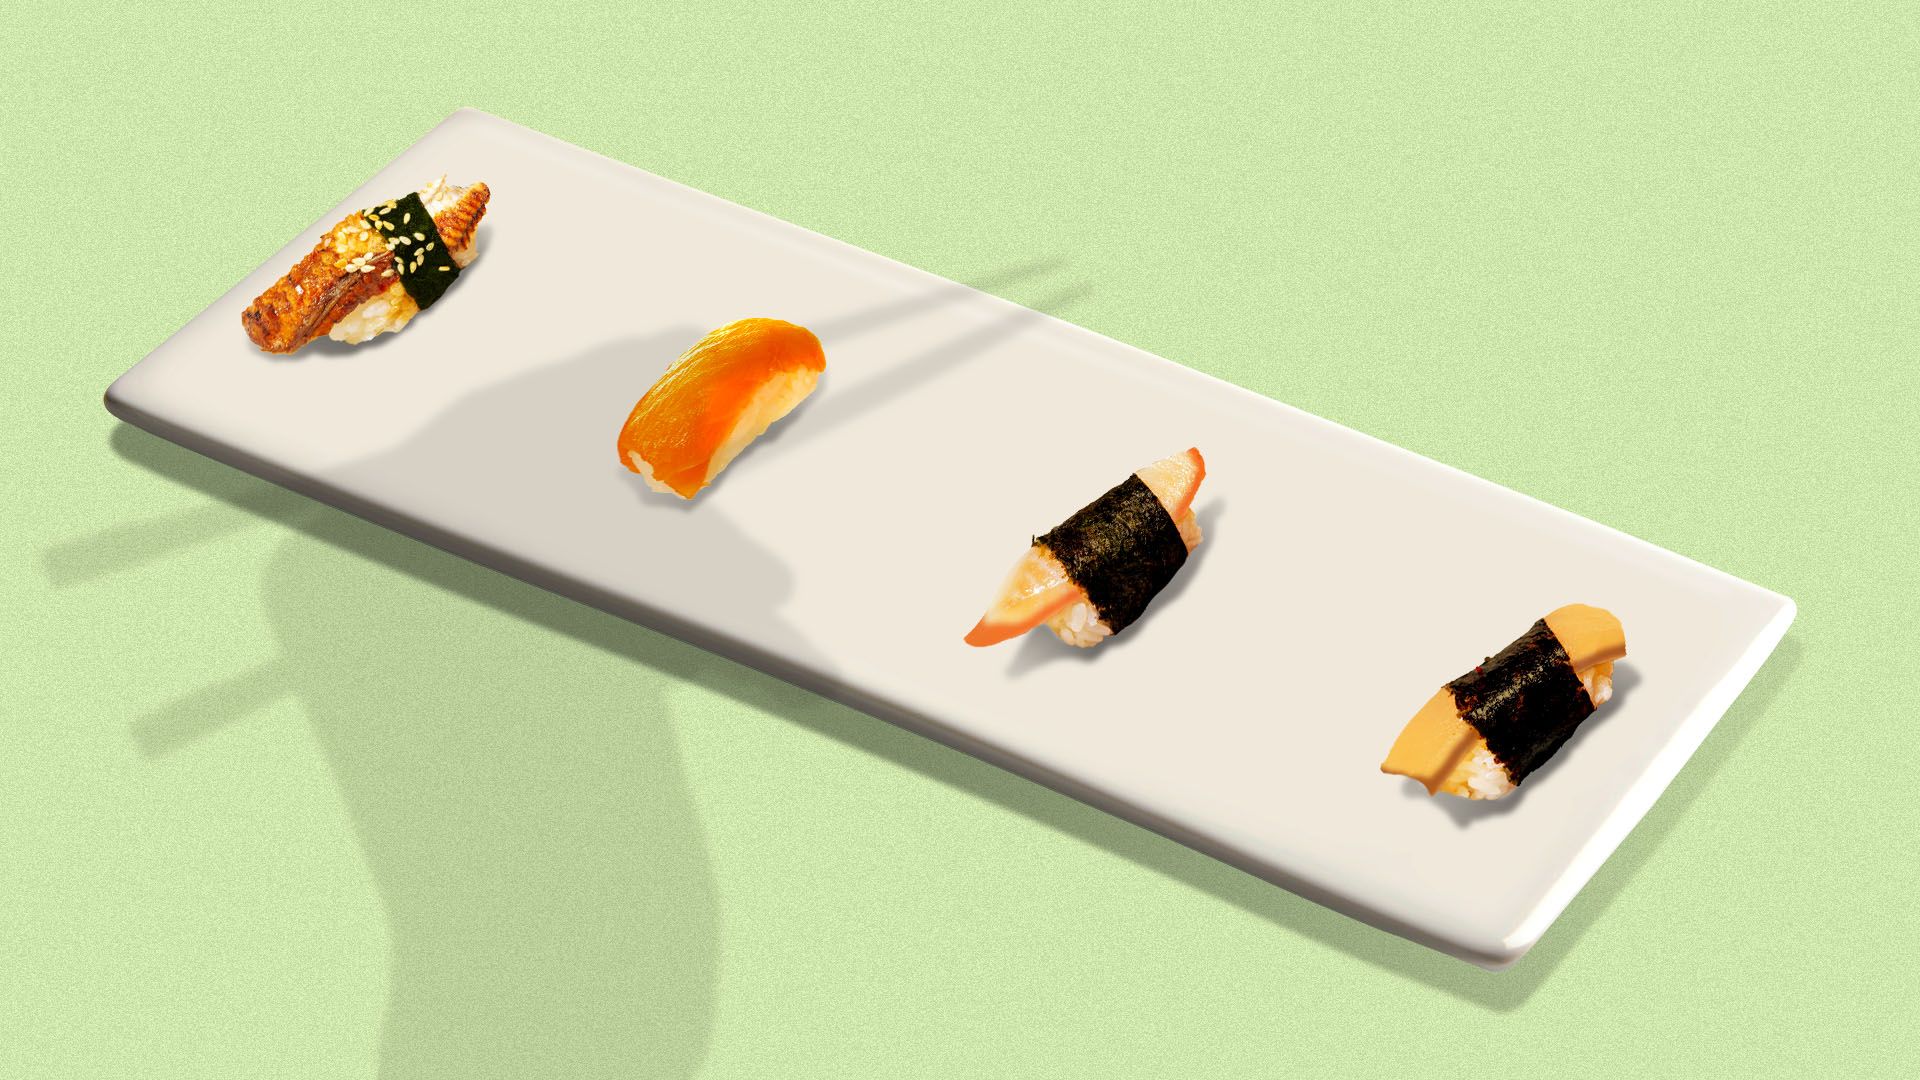 Illustration of a plate of sushi with the pieces distantly placed apart